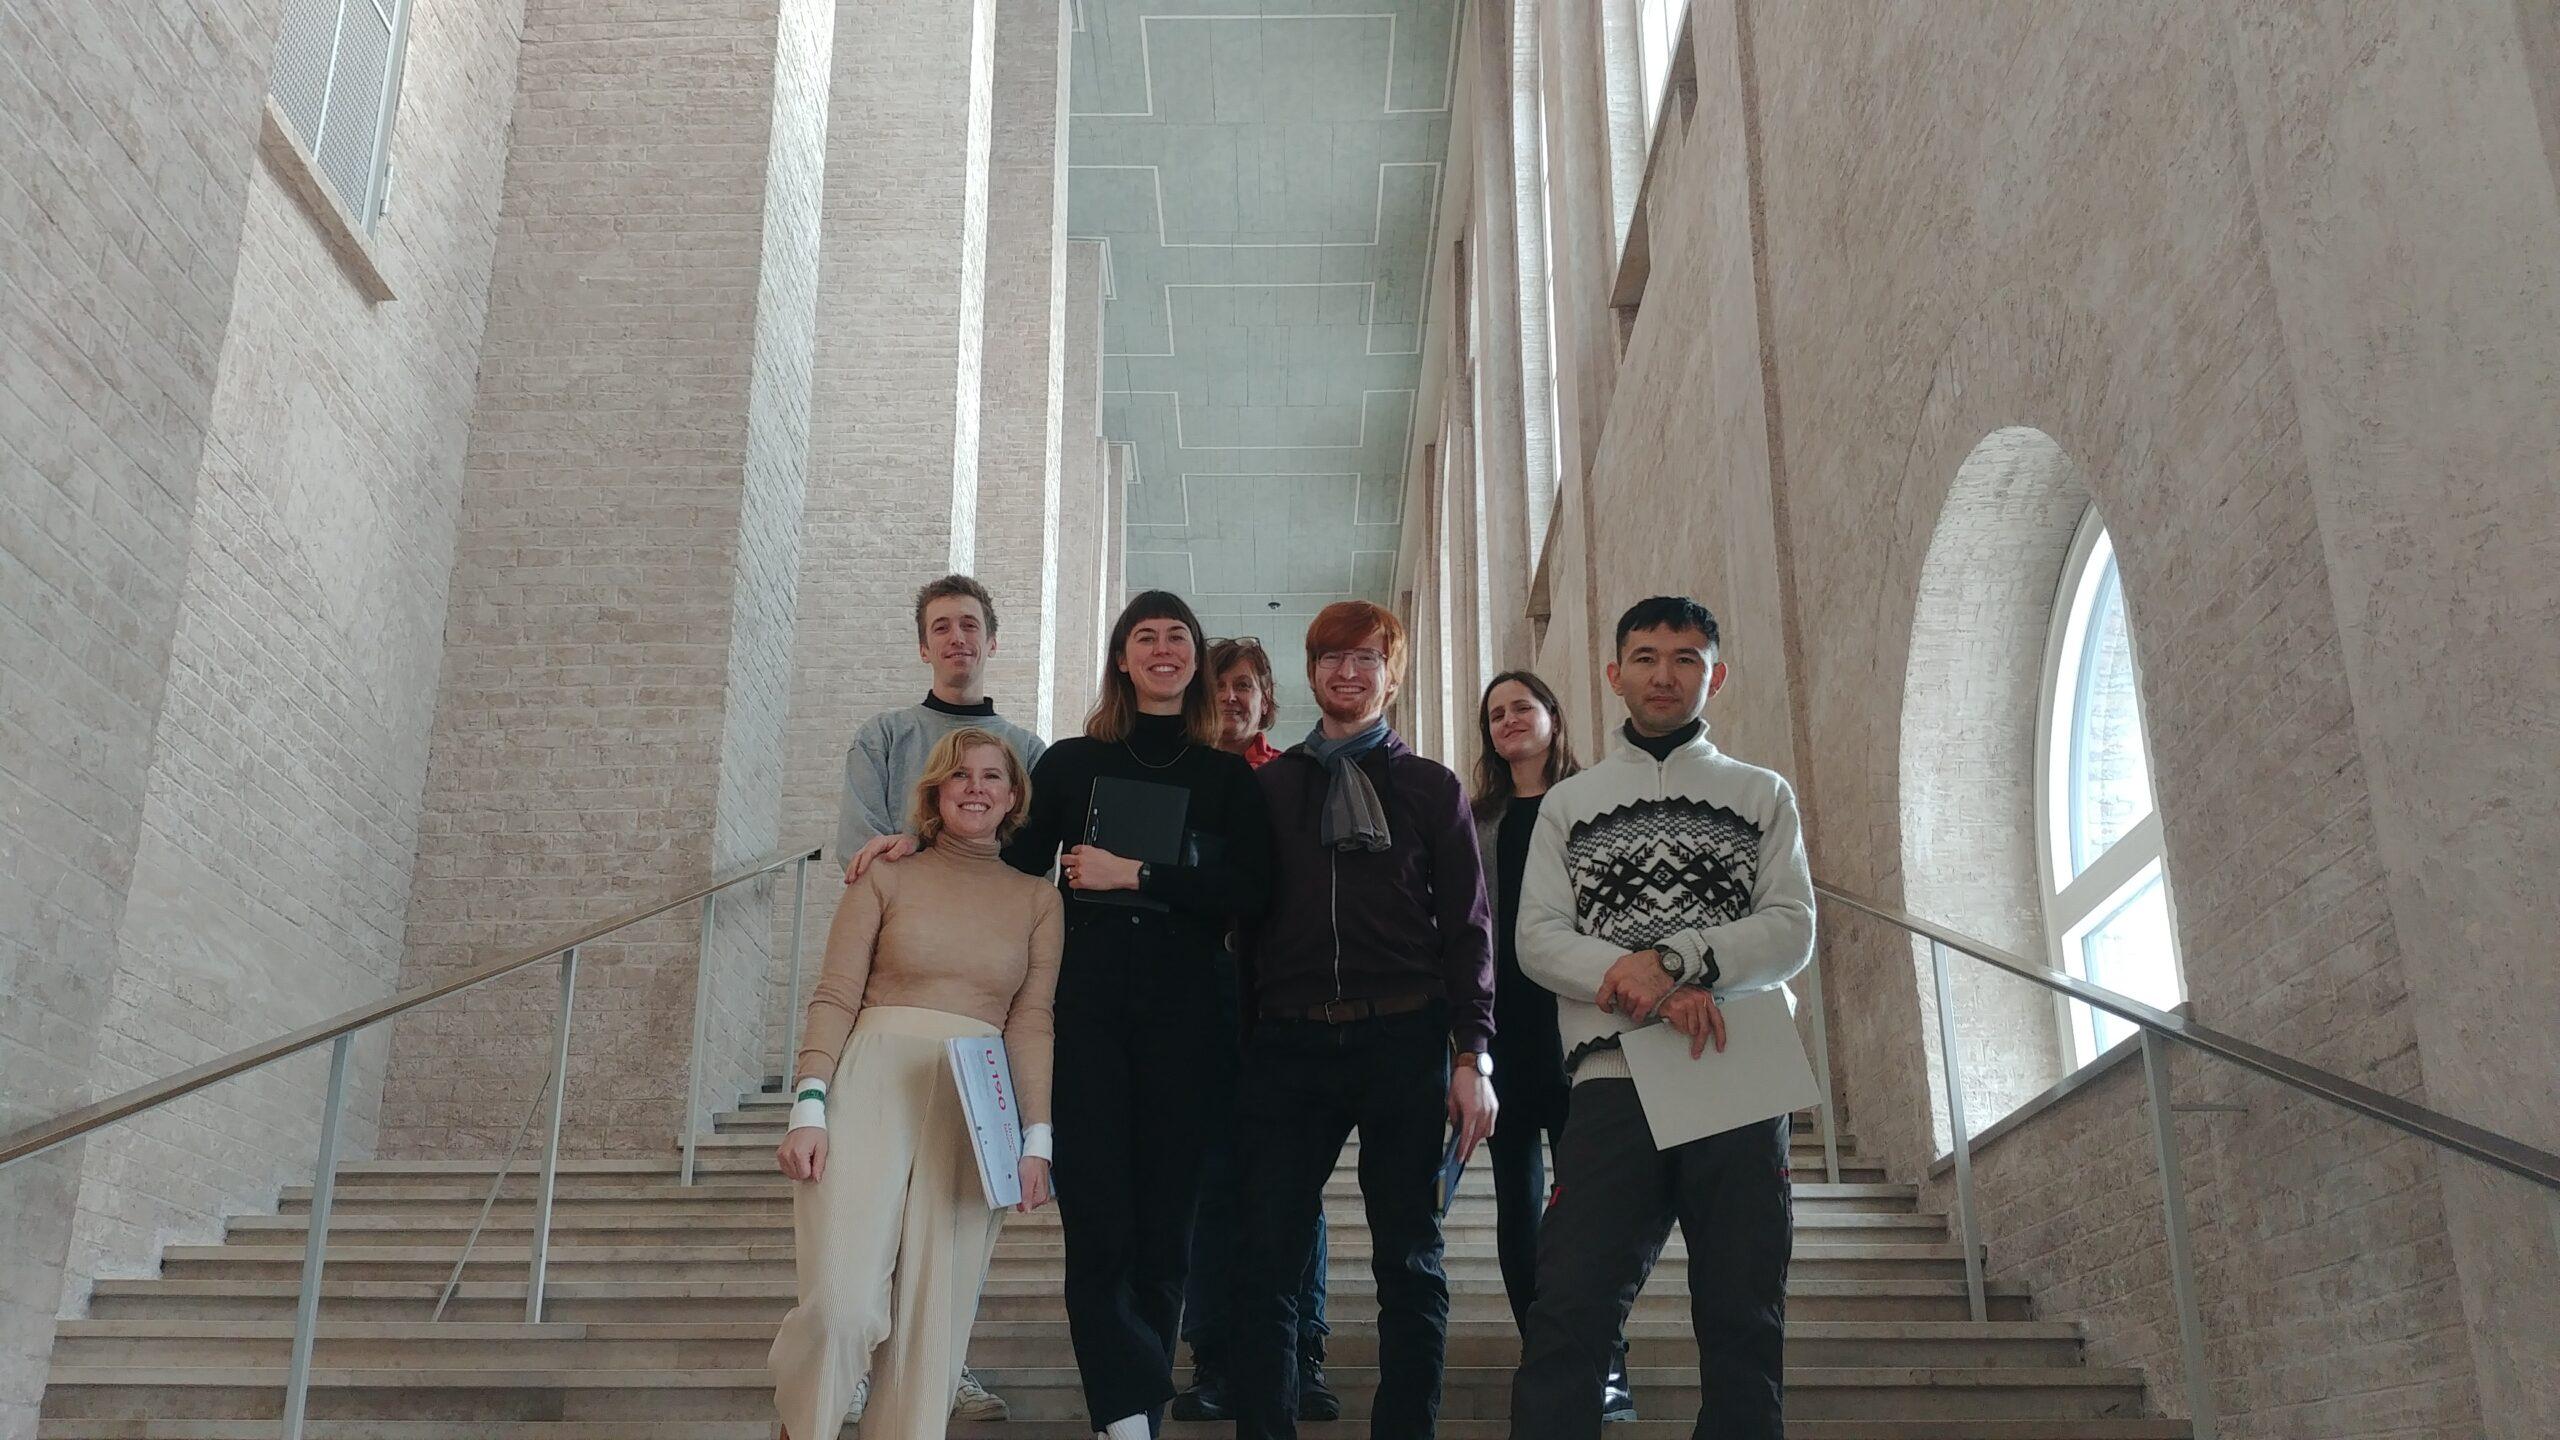 The guided group standing on stairs at the Alte Pinakothek